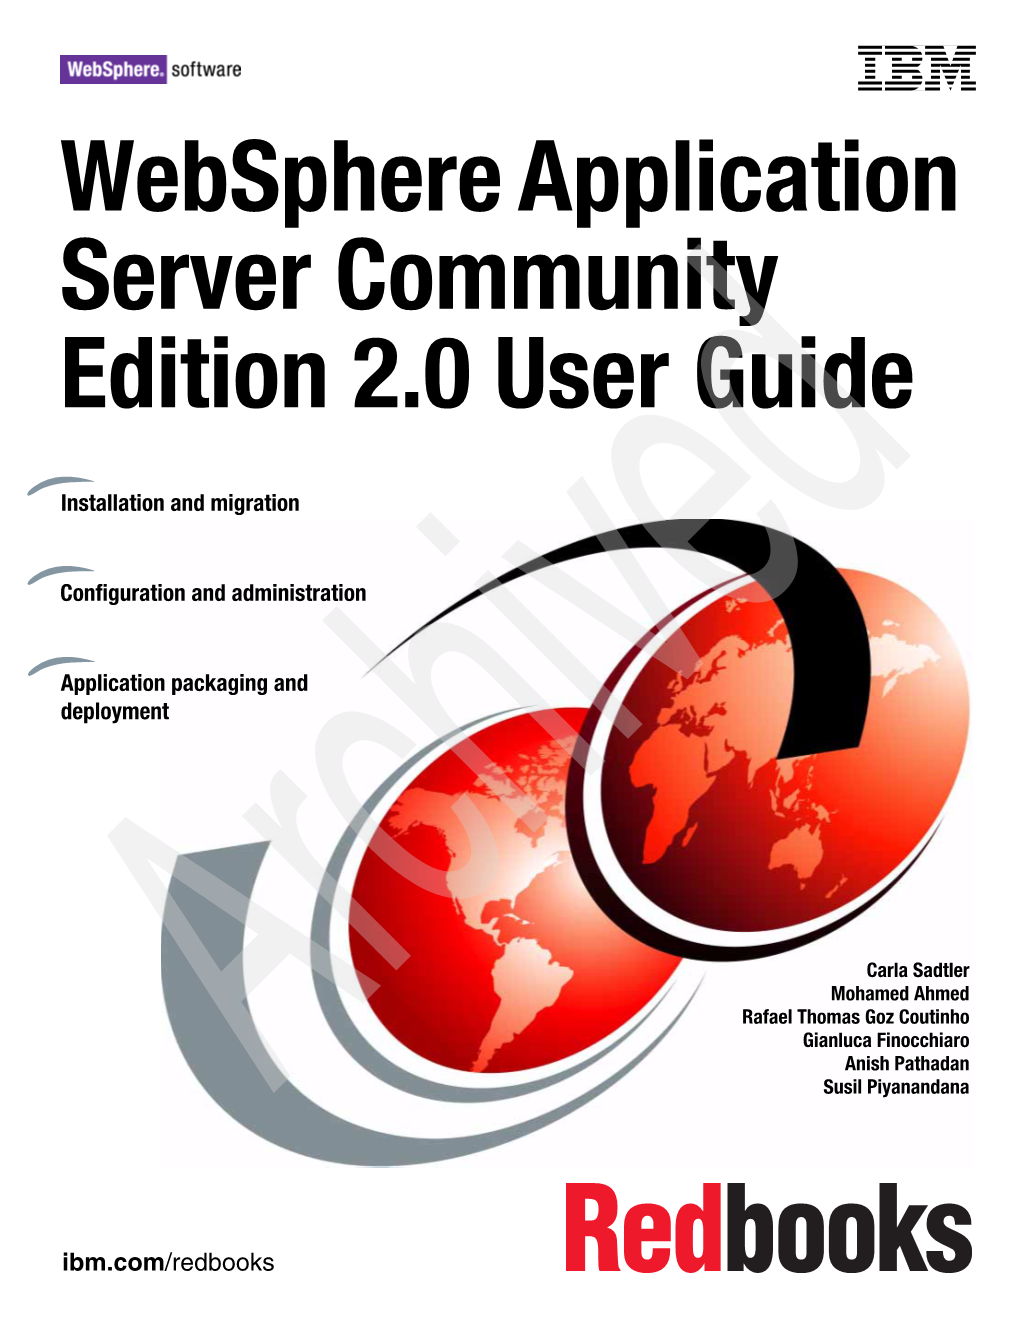 Websphere Application Server Community Edition 2.0 User Guide